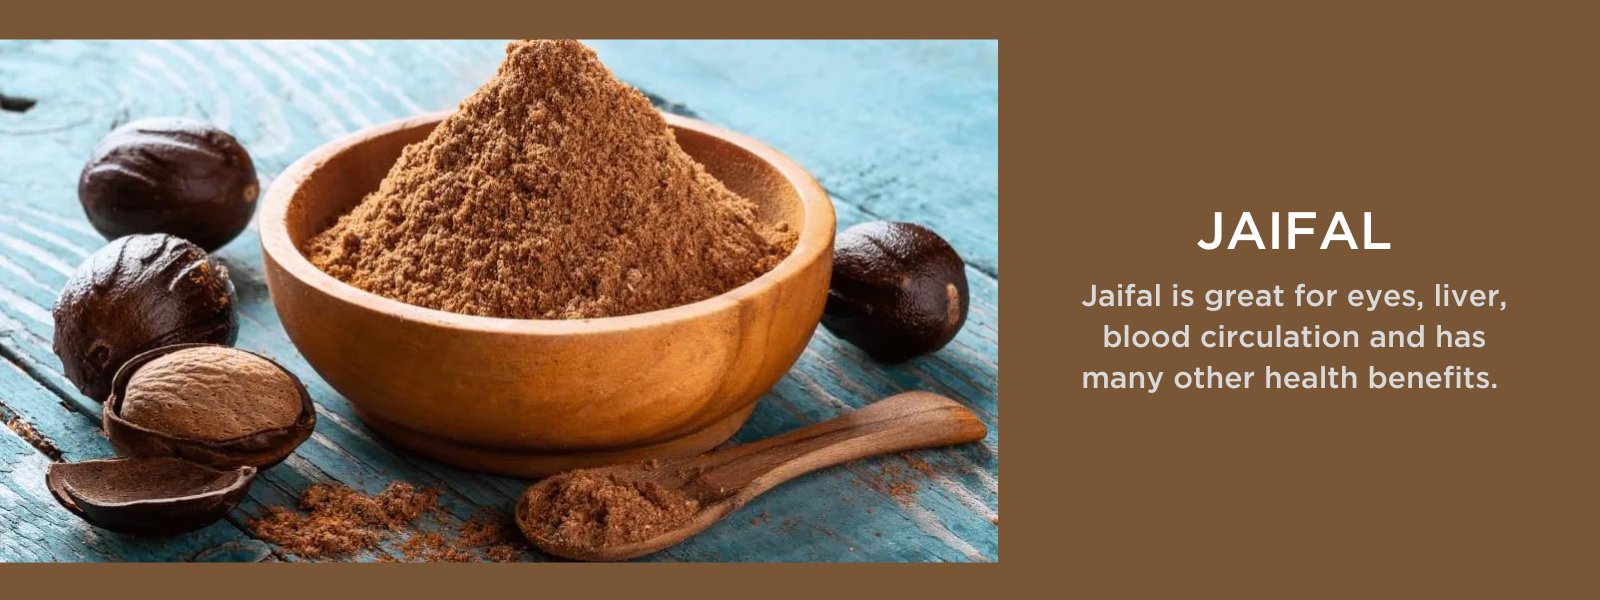 Jaifal- Health Benefits, Uses and Important Facts